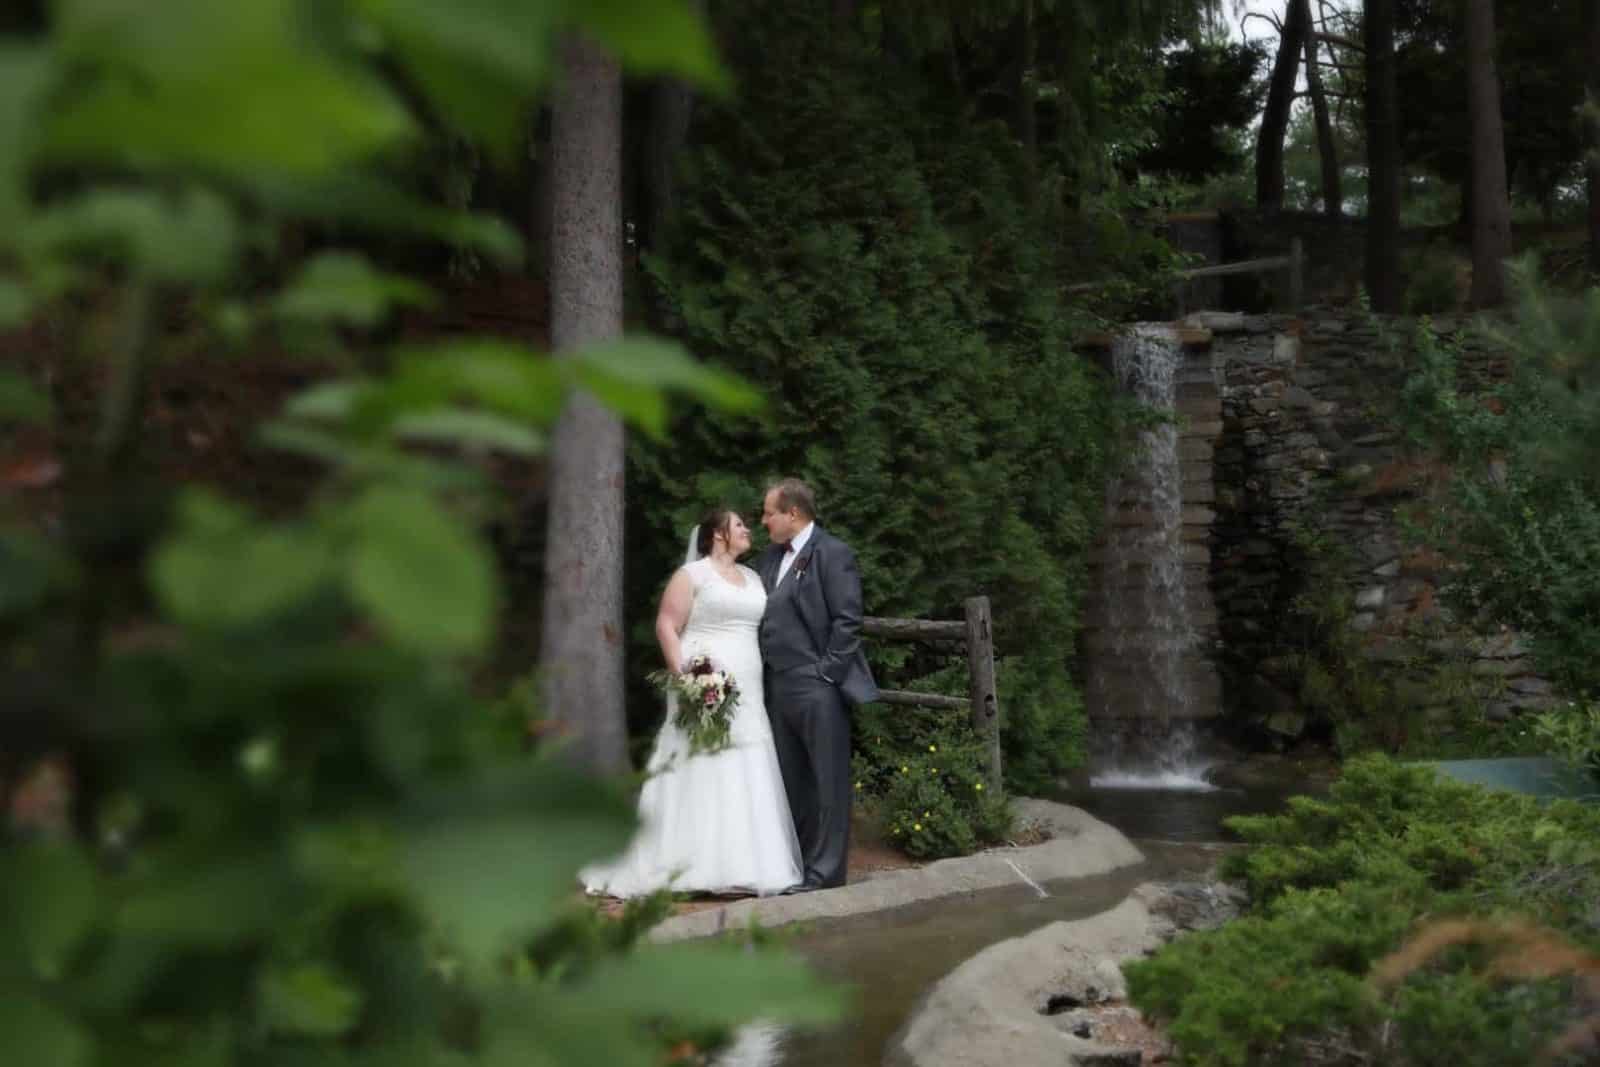 Bride and groom looking at one another near waterfall and stone walk way